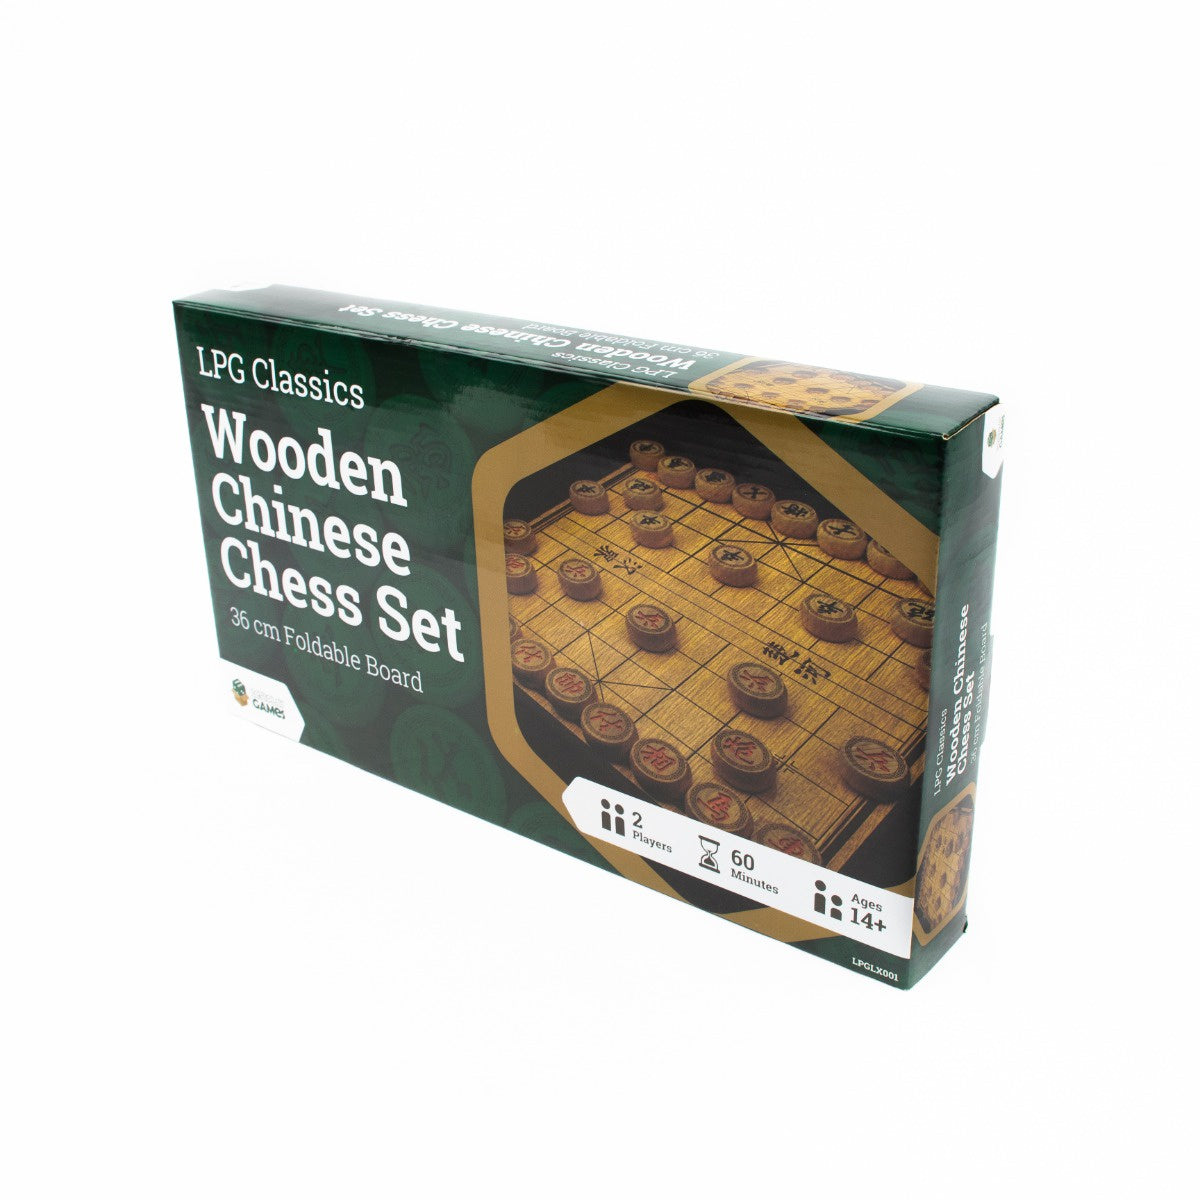 LPG Wooden Chinese Chess Set - 36 cm Foldable Board